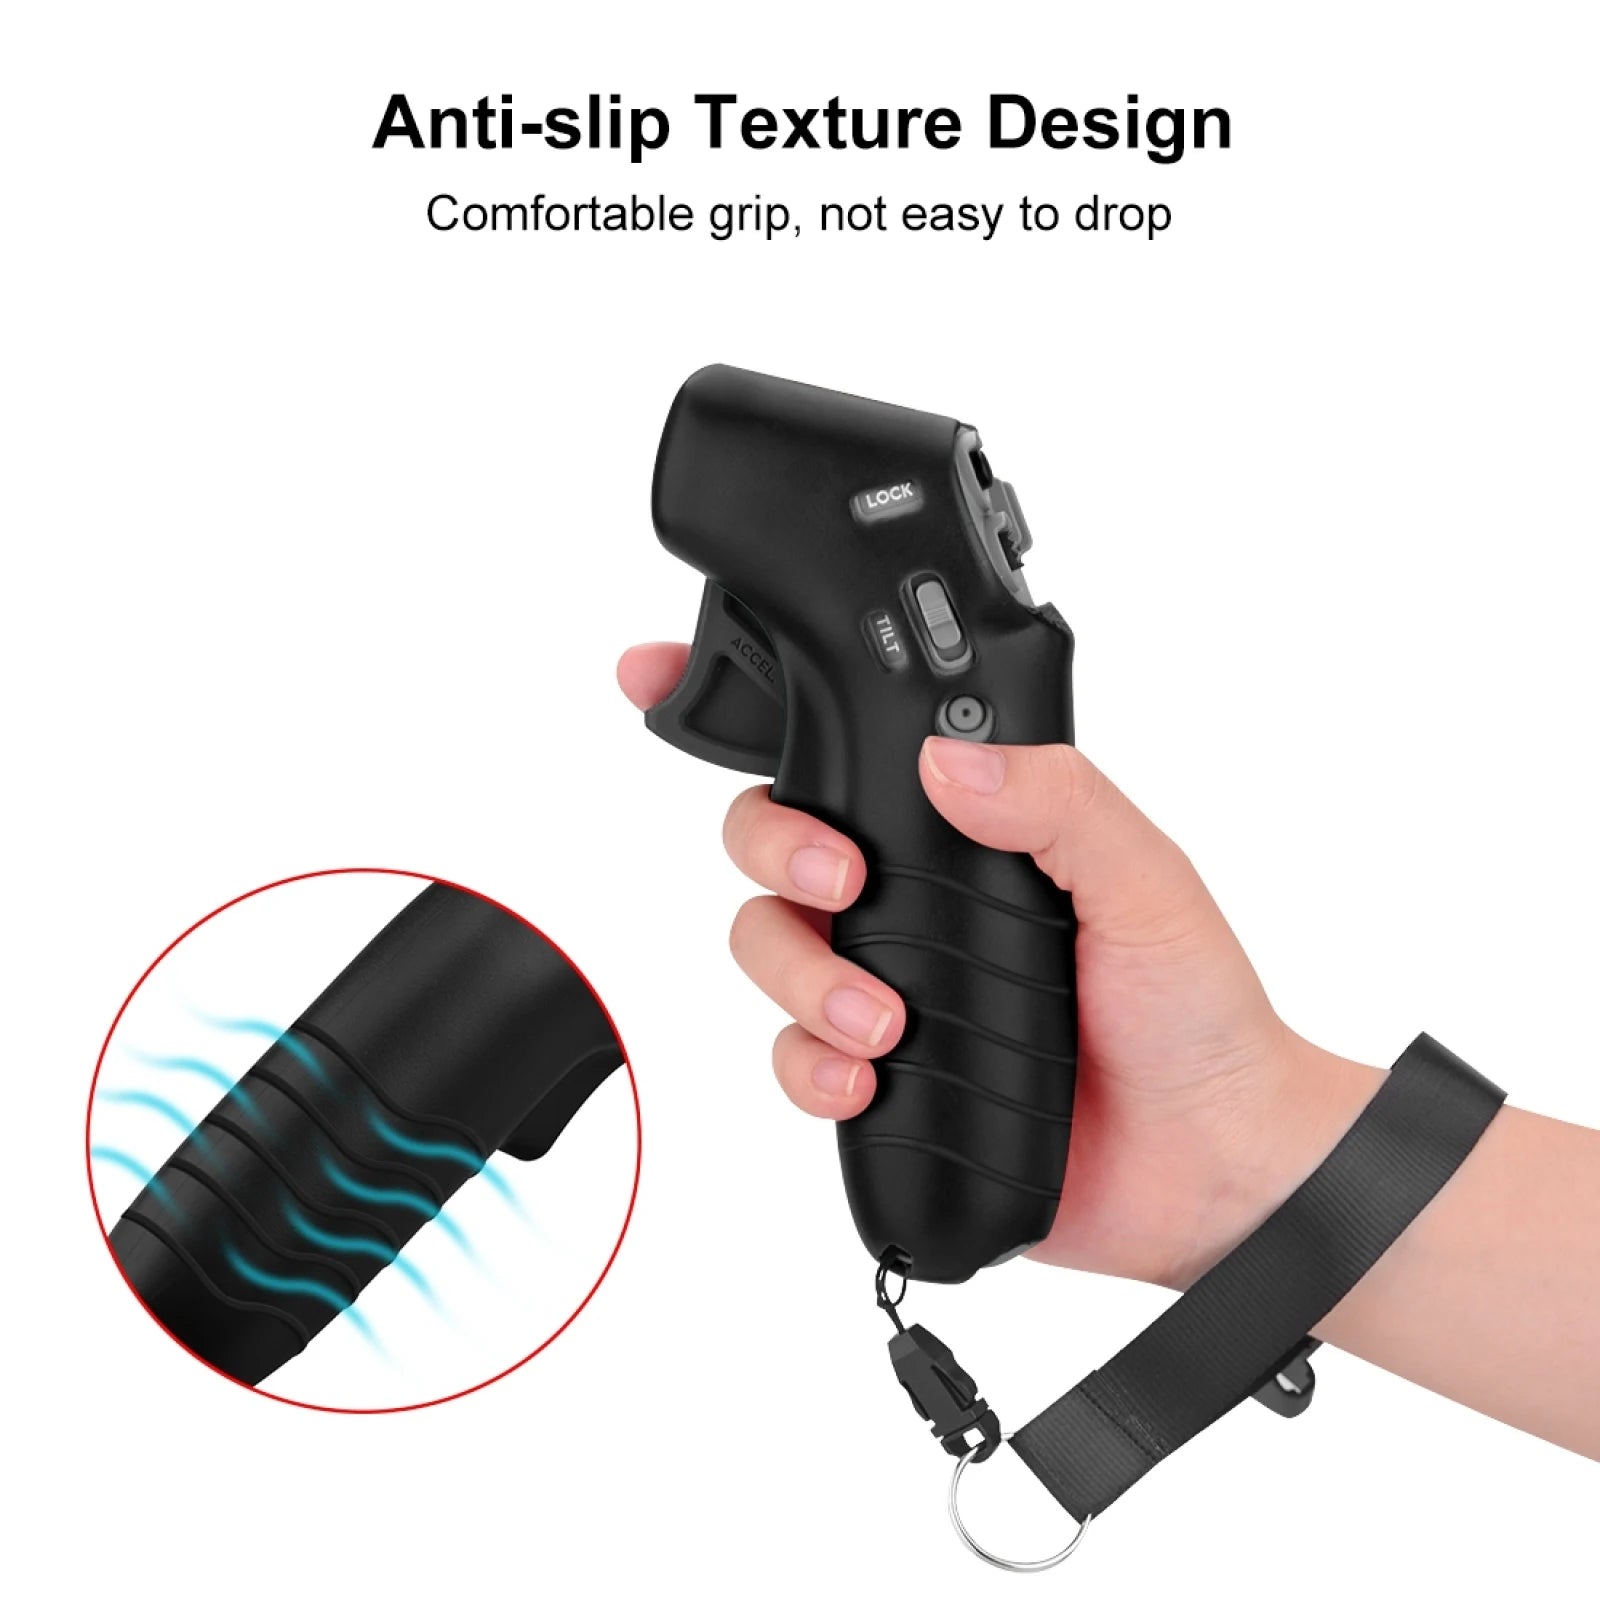 Anti-slip Texture Design Comfortable grip, not easy to drop Acdal